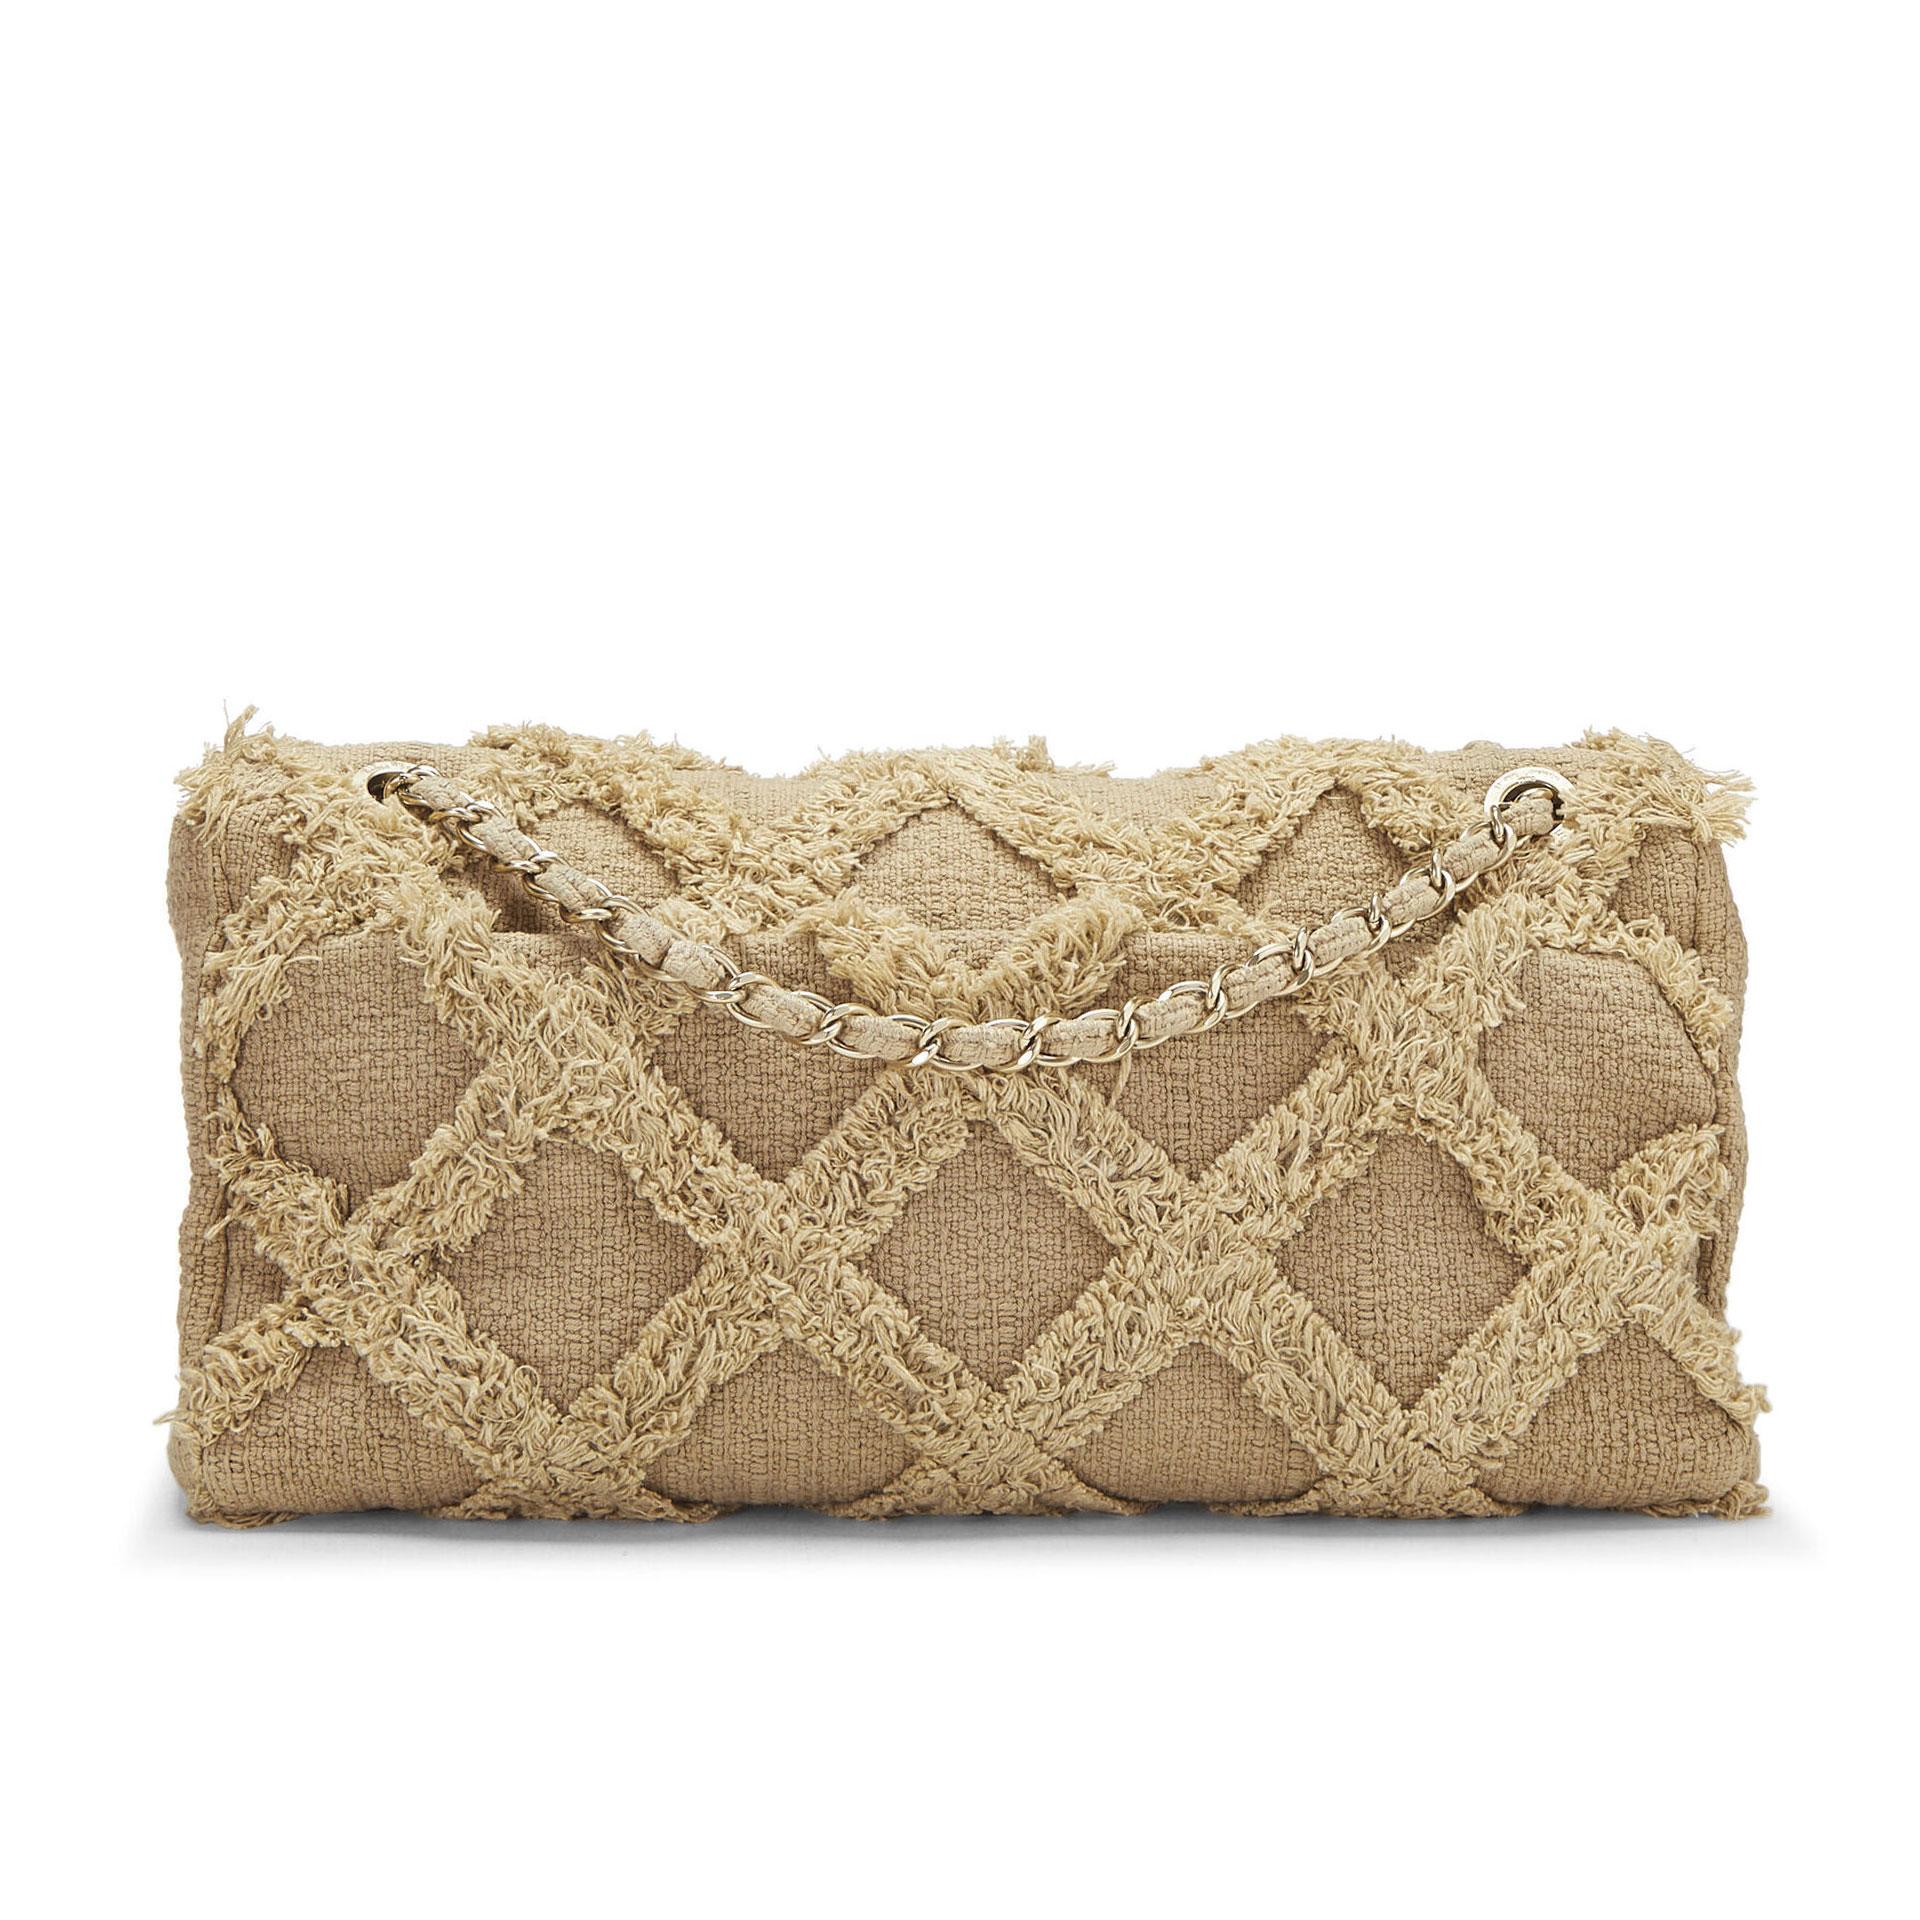 Chanel Limited Edition XL Maxi Organic Tweed Woven Summer Vacation Shoulder Bag  For Sale 1